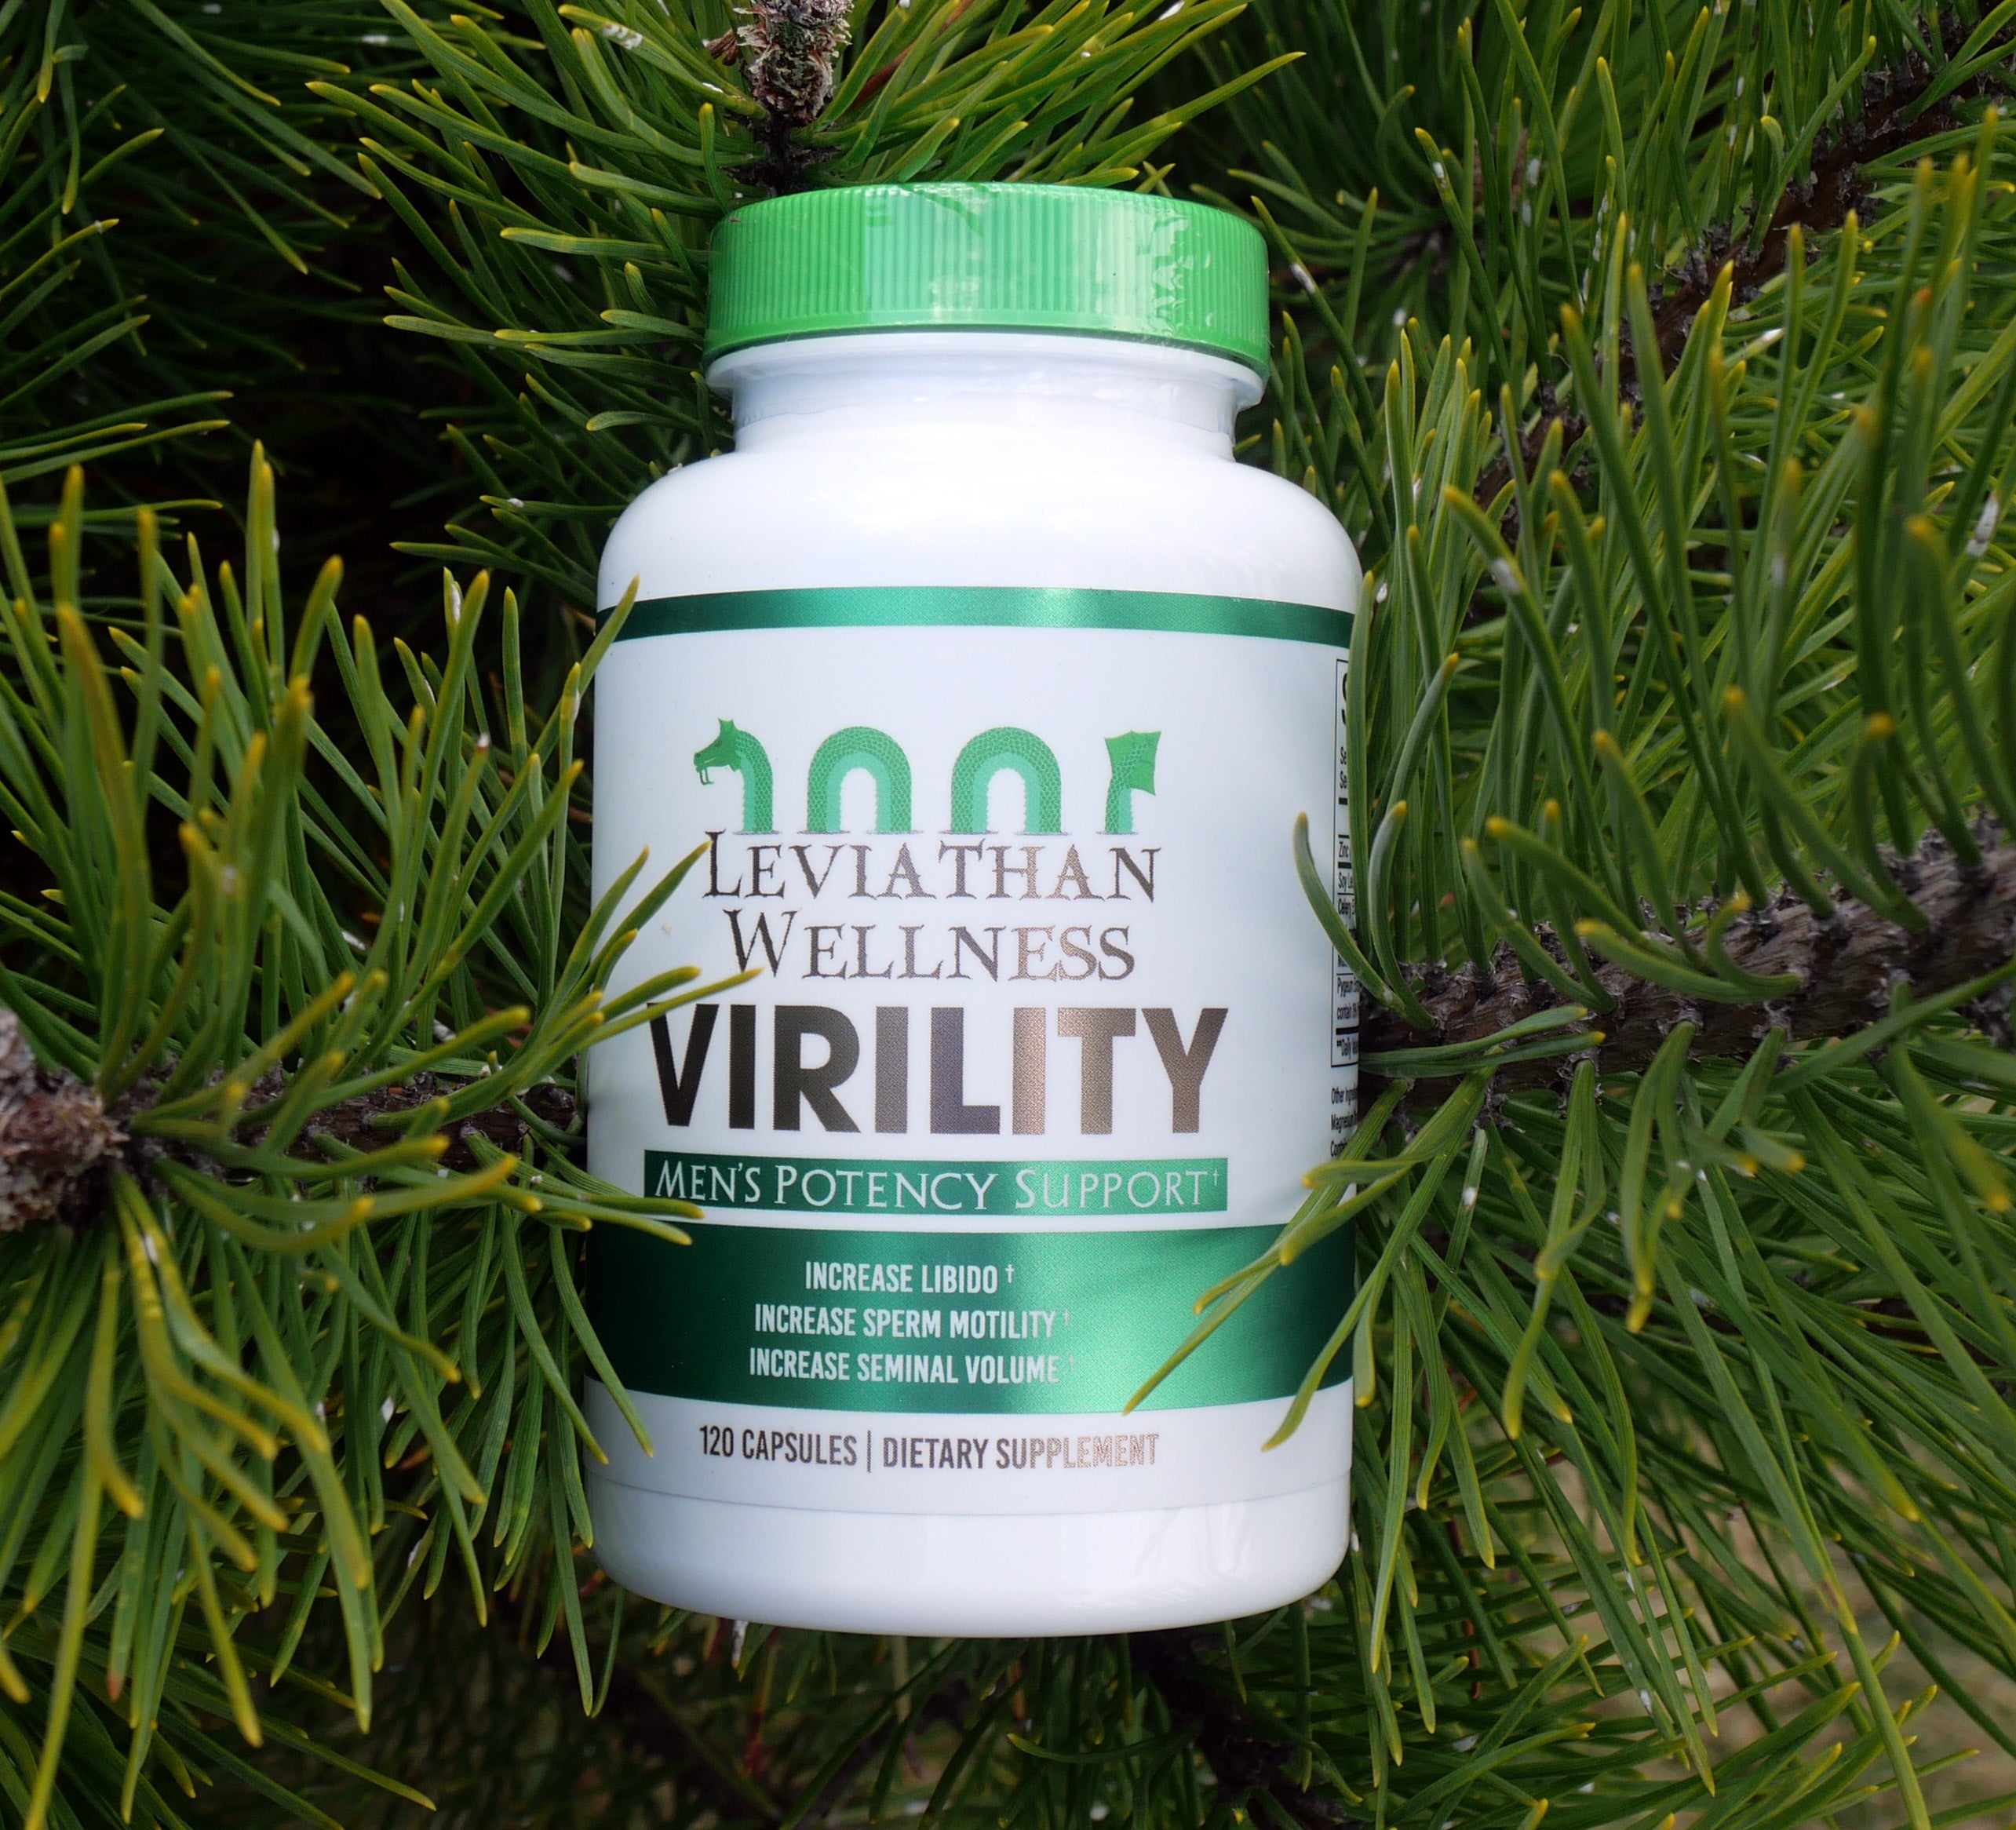 Virility - Men's Potency Support by Leviathan Wellness